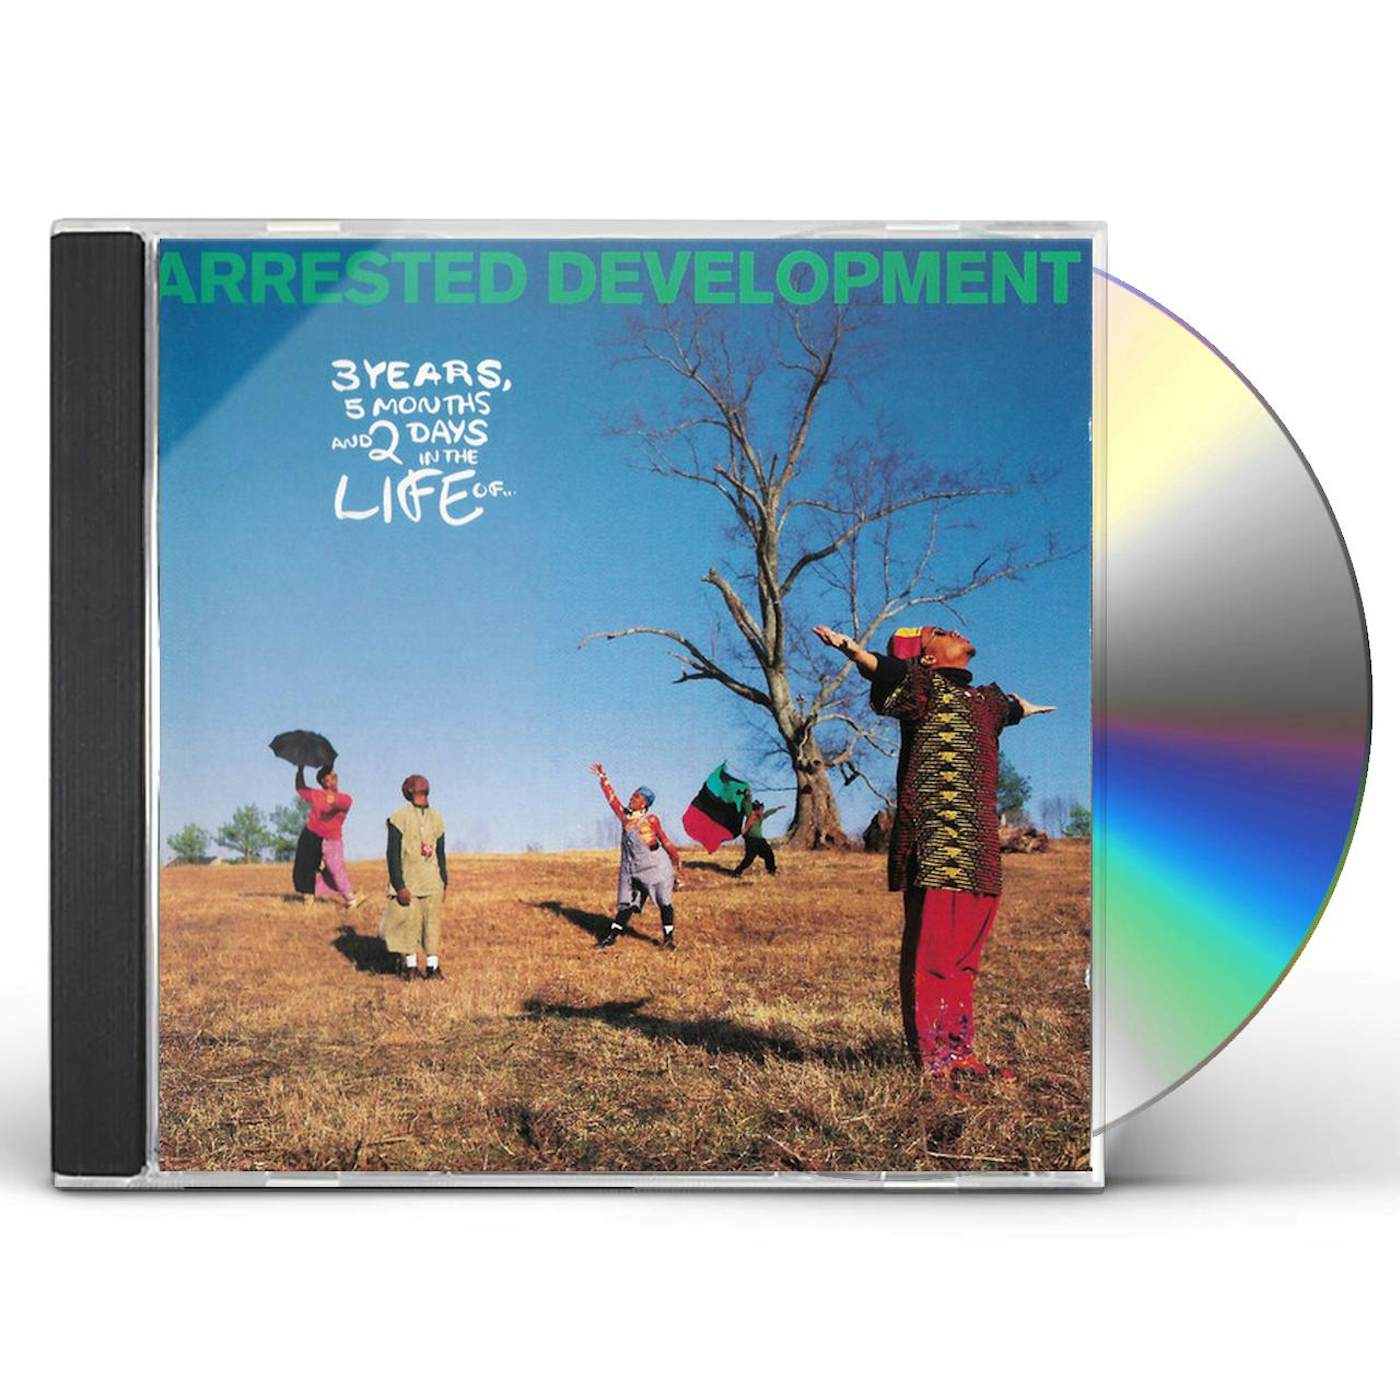 Arrested Development 3 YEARS 5 MONTHS & 2 DAYS IN LIFE CD